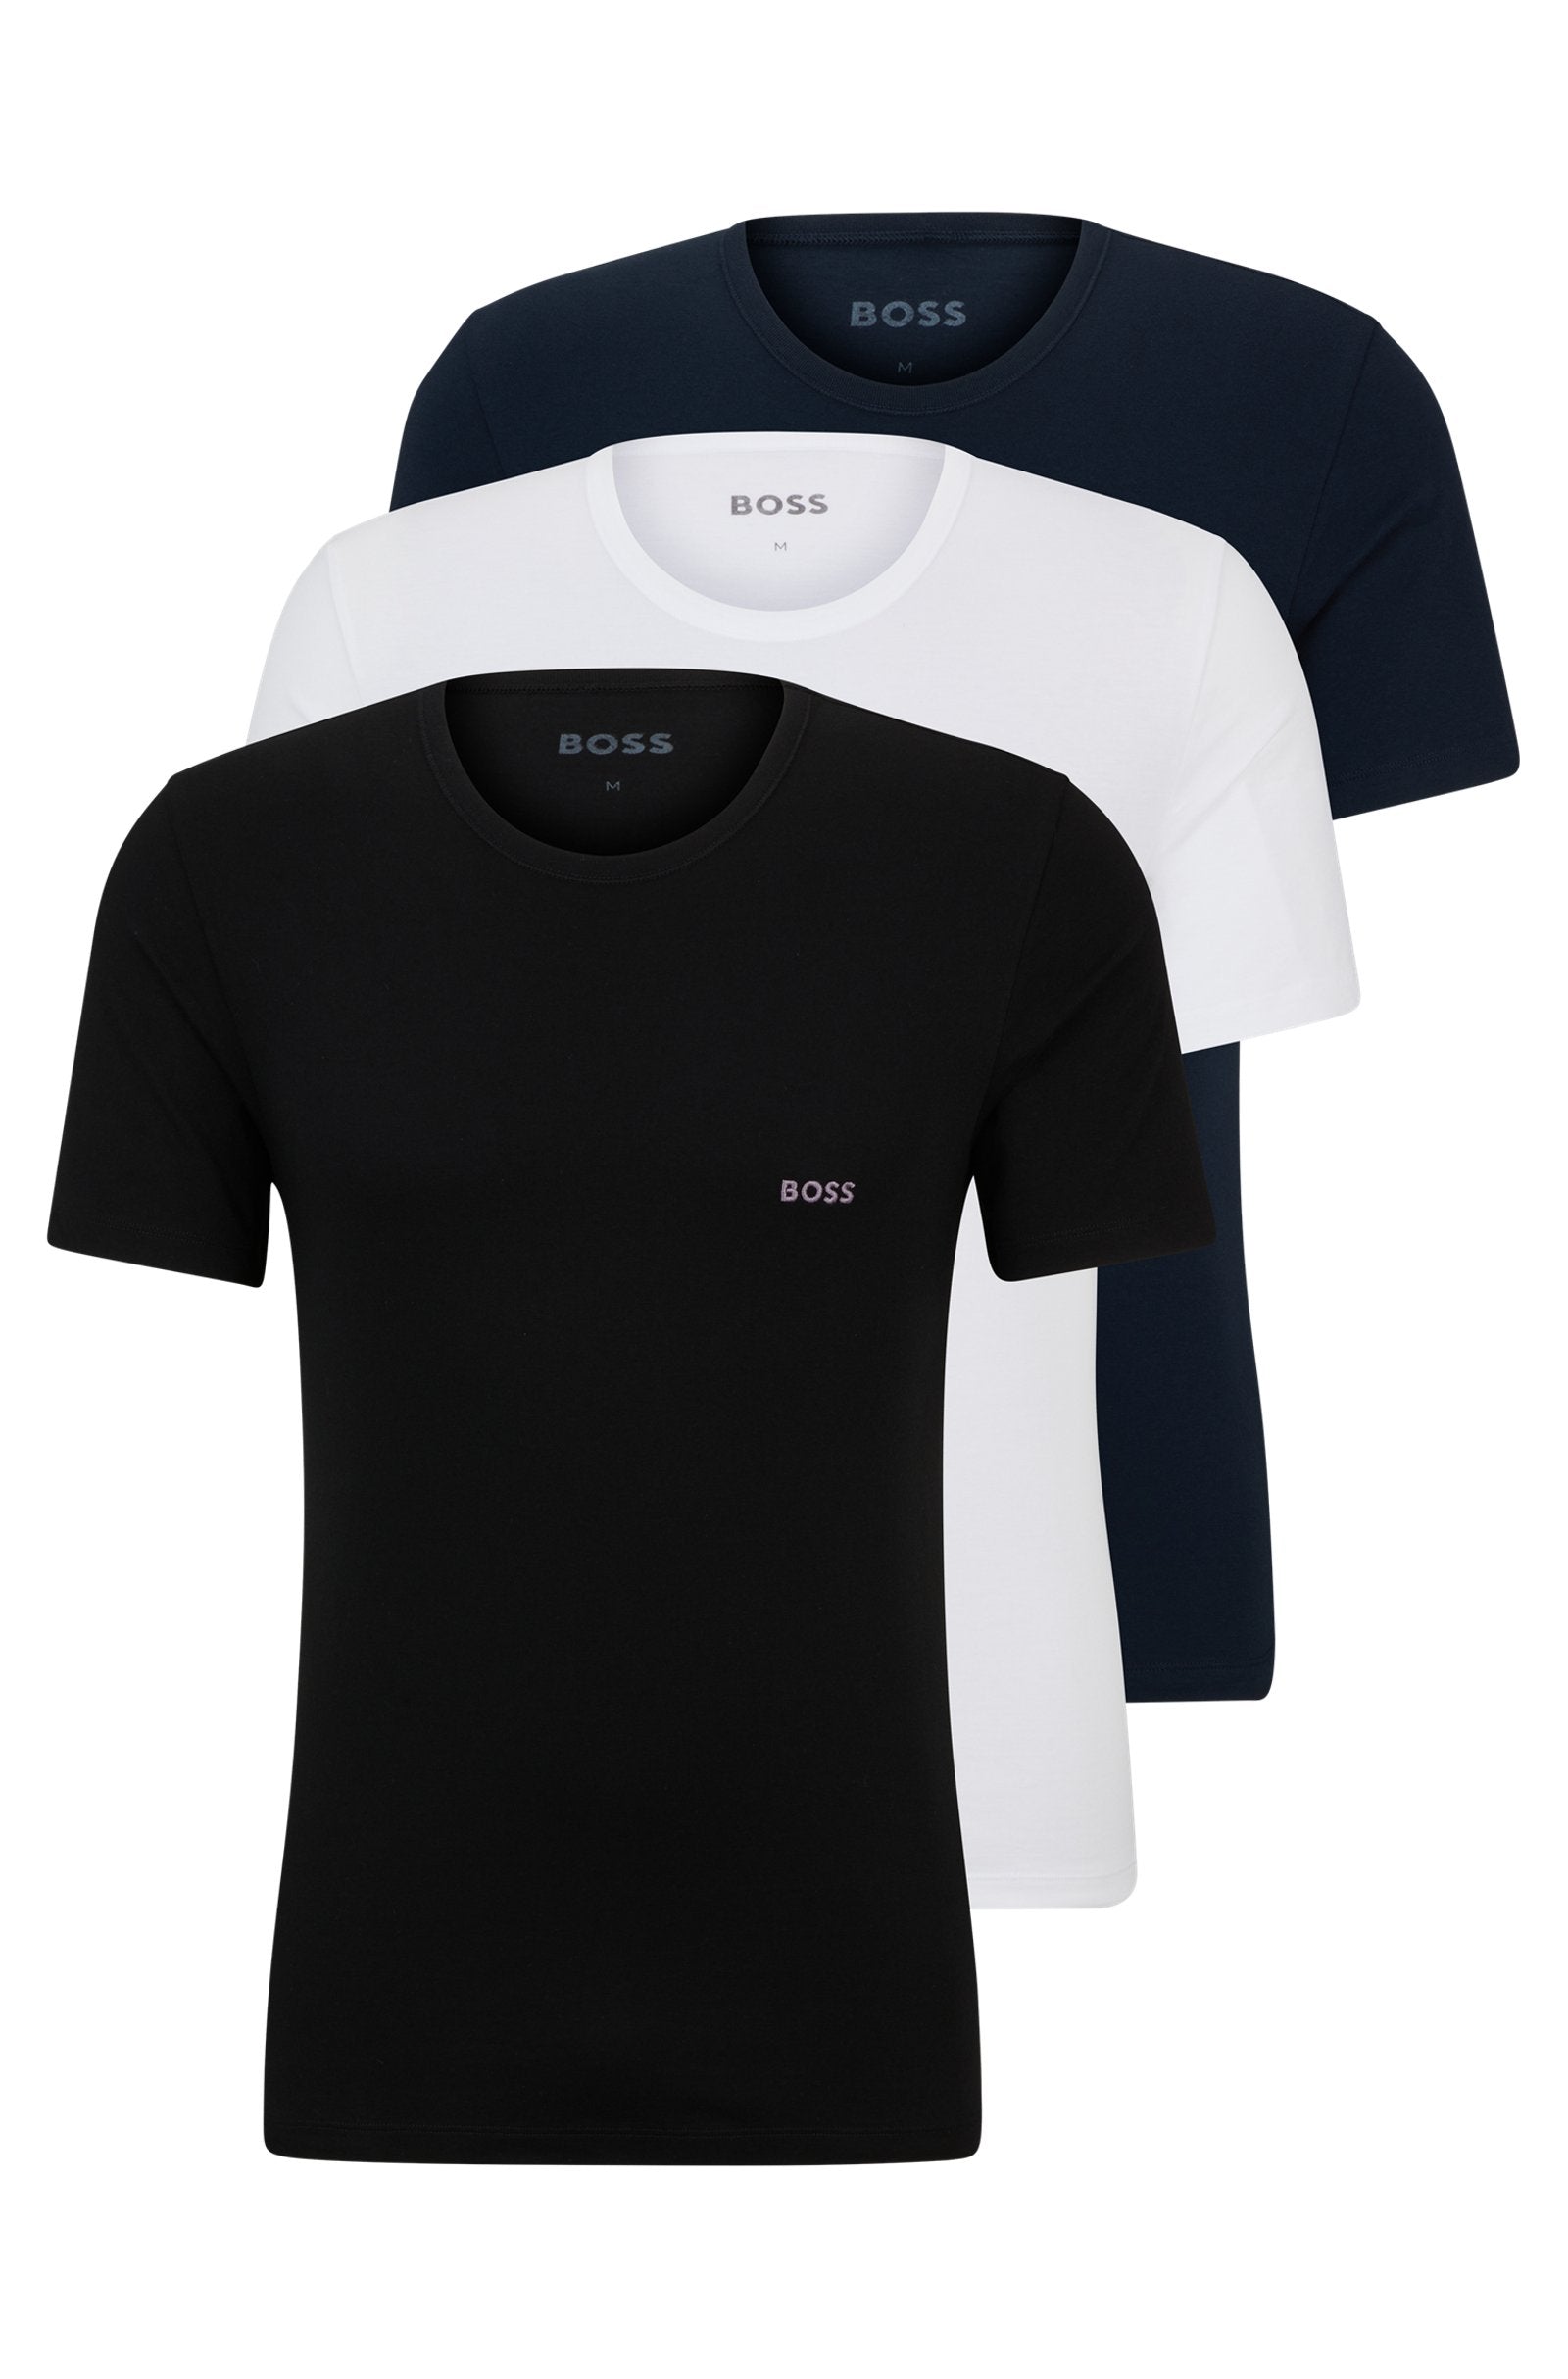 BOSS - Boxed 3 Pack Of Branded Underwear T-Shirts In Cotton Jersey 50509255 982